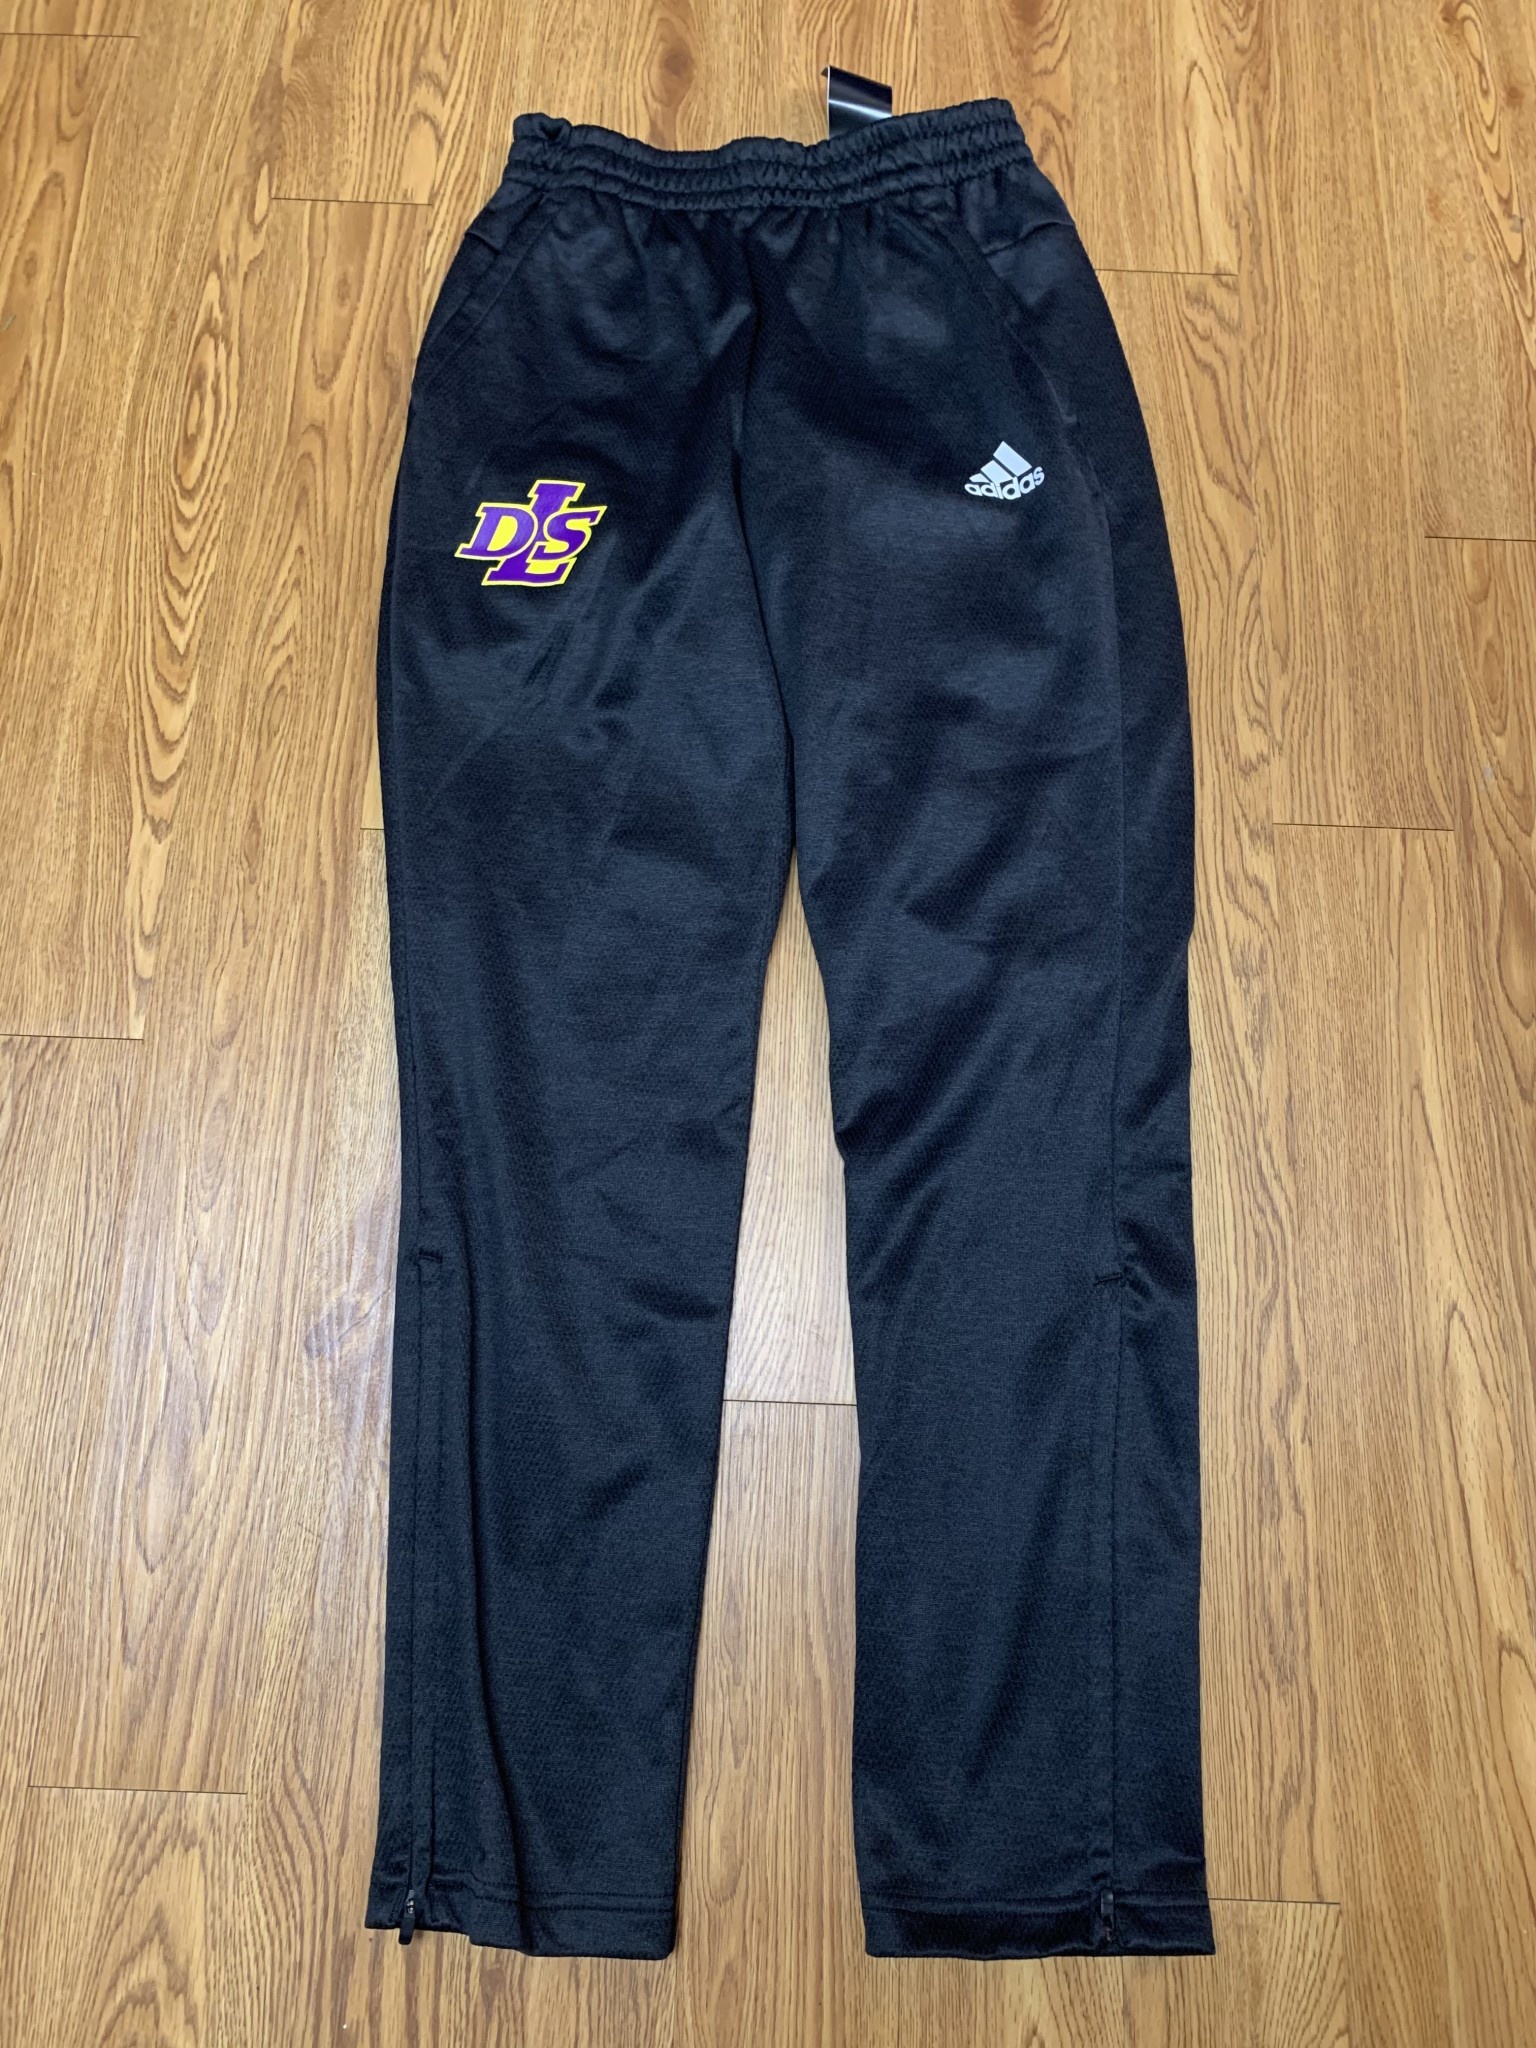 team issue pants